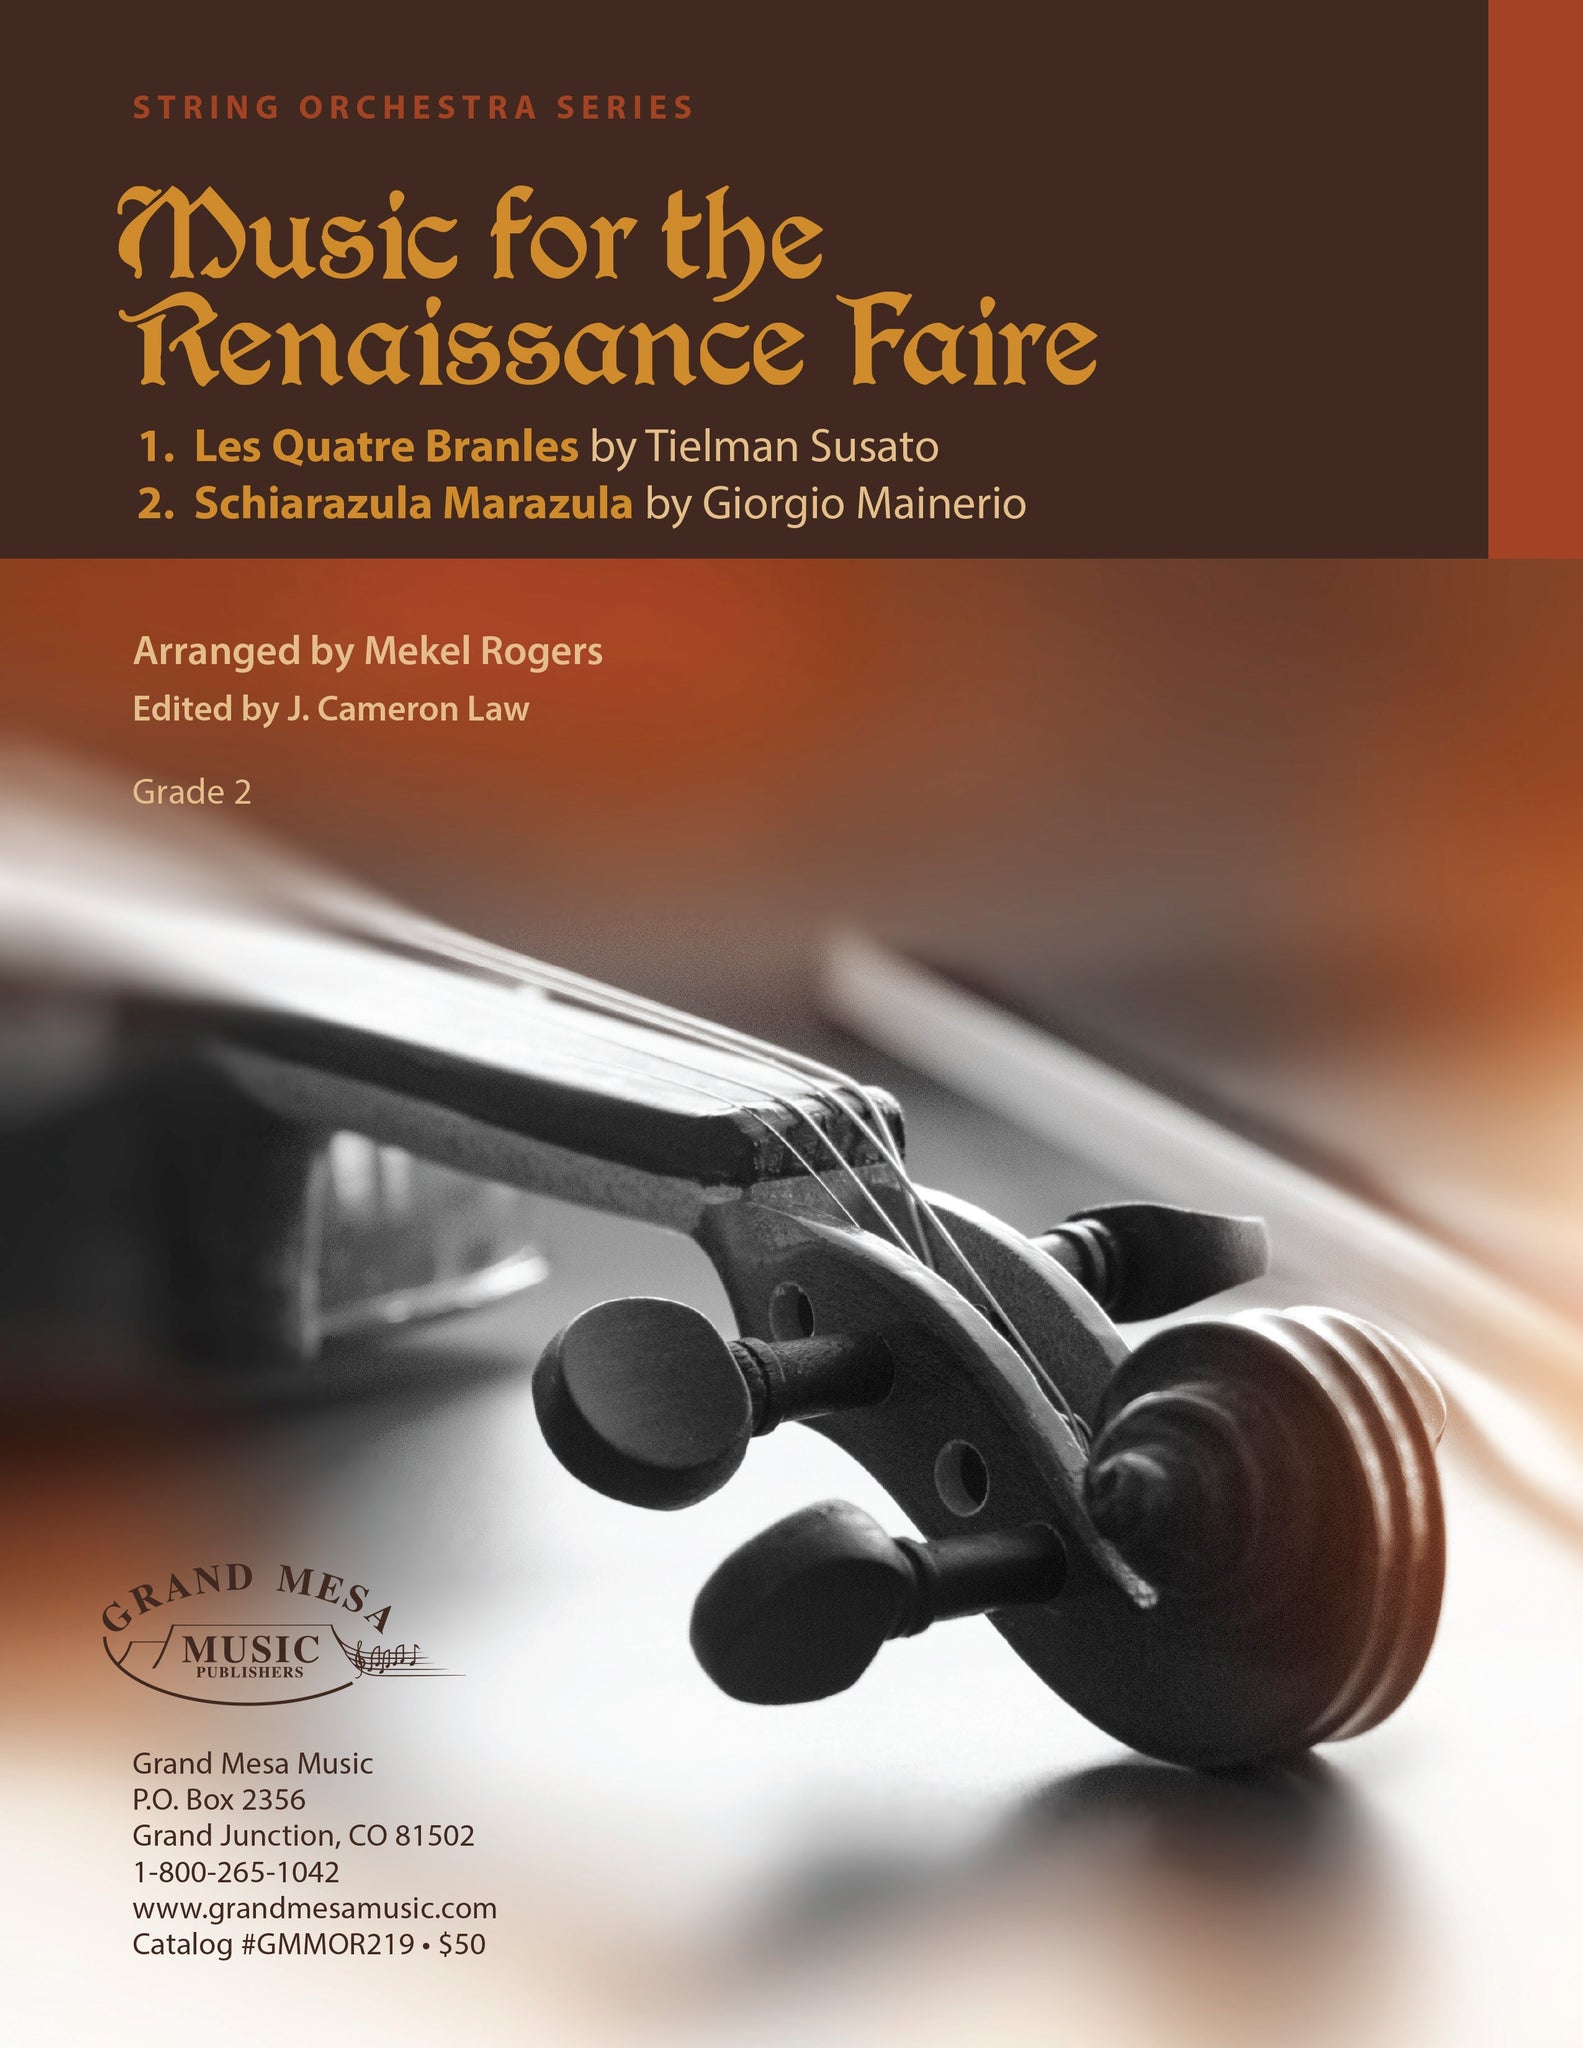 Strings sheet music cover of Music for the Renaissance Faire, composed by Tielman Susato and Giorgio Mainerio, arranged by Mekel Rogers.